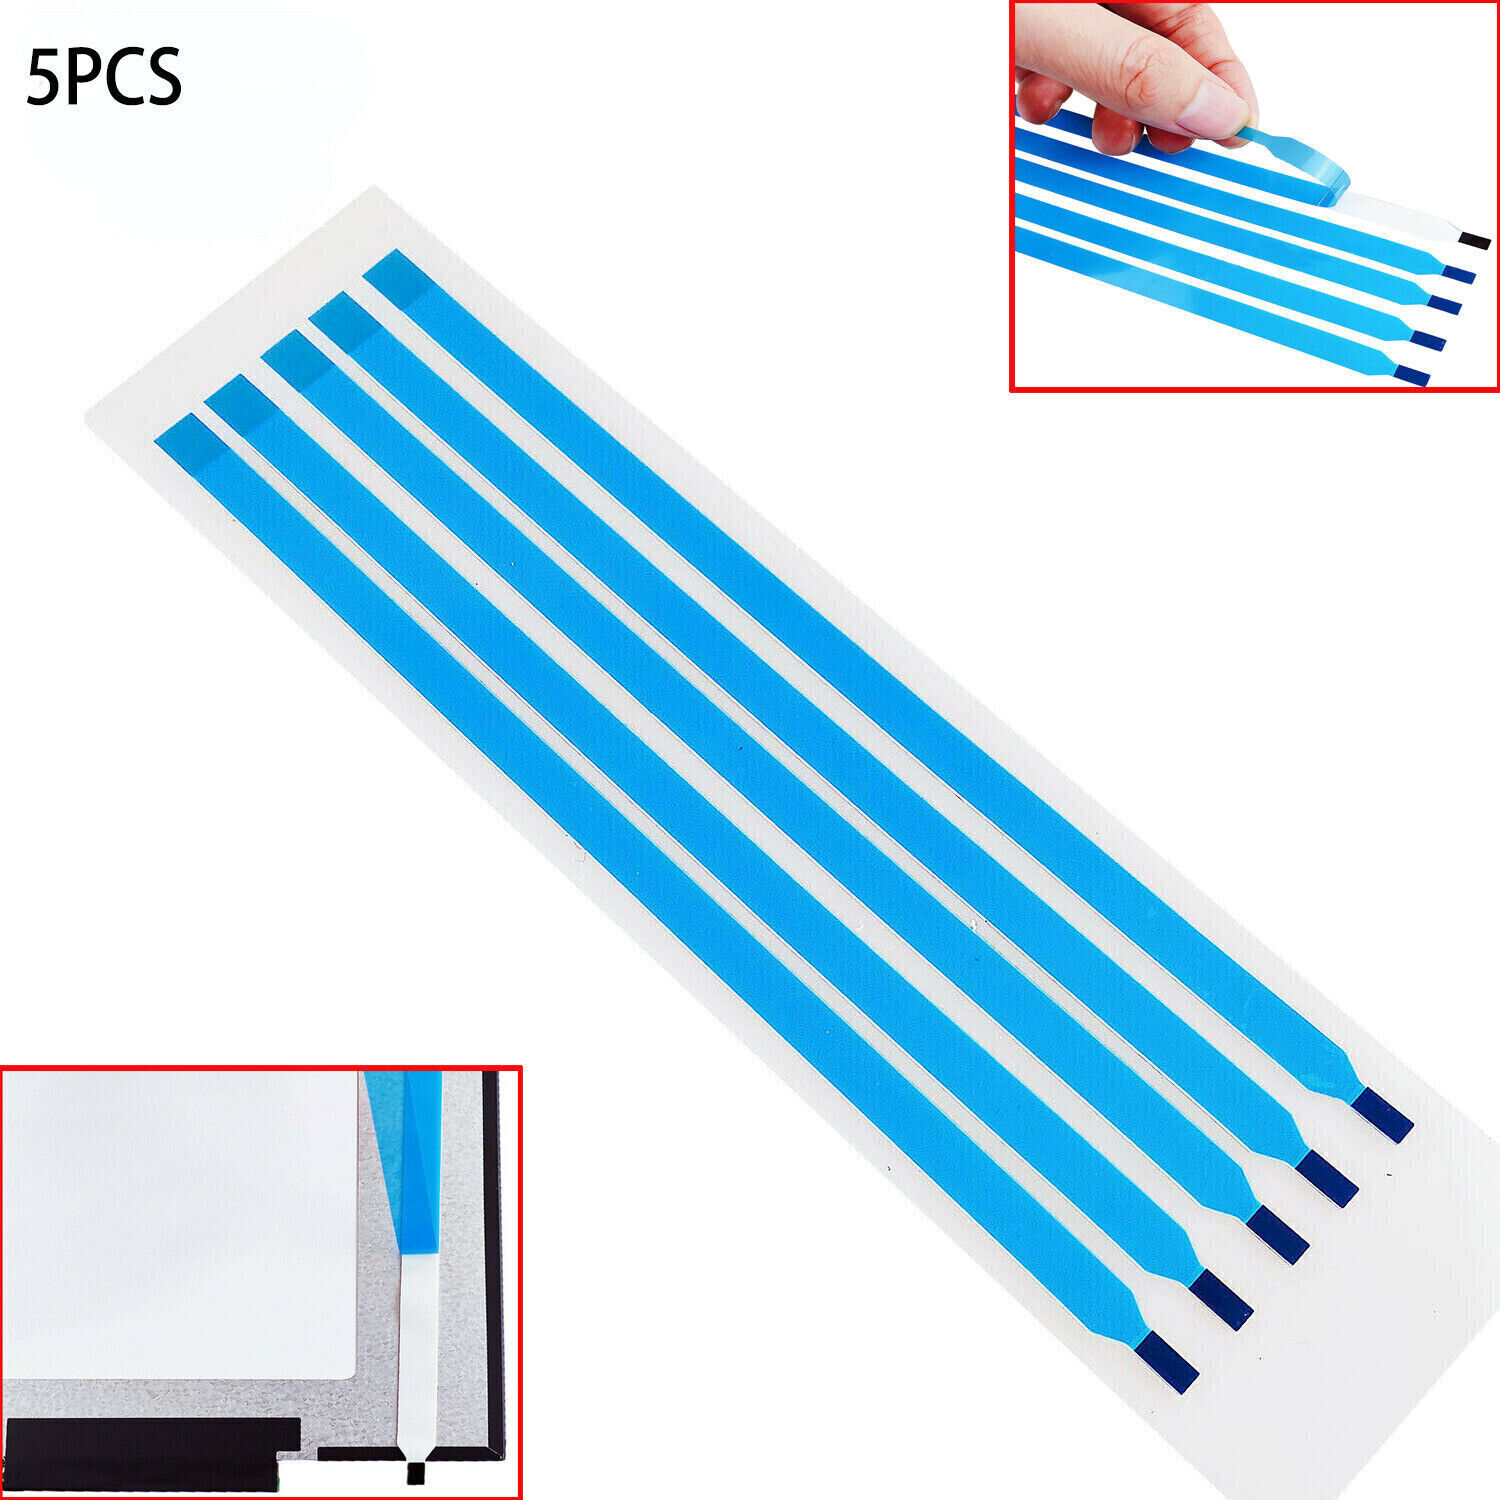 5 Pcs New Pull Tabs Stretch Release Adhesive Strips With Tabs For LCD Screen US